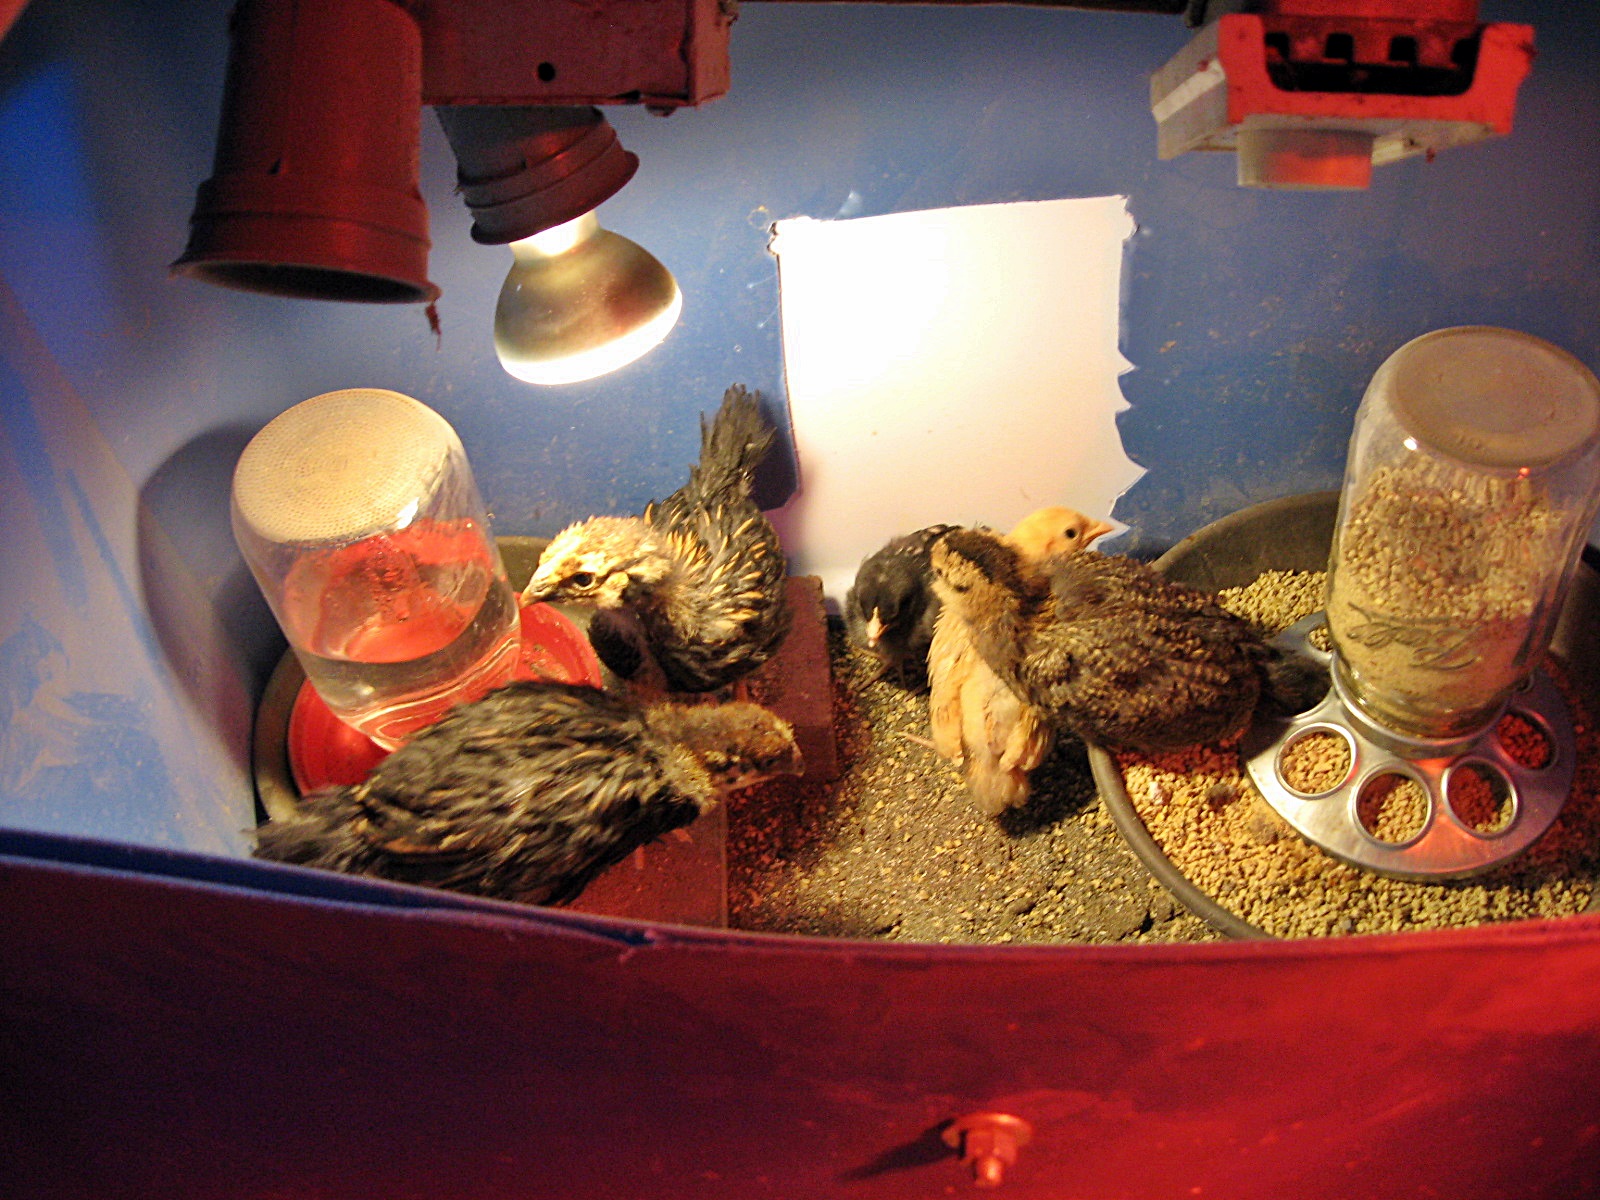 Second batch of chicks in the bigger brooders.